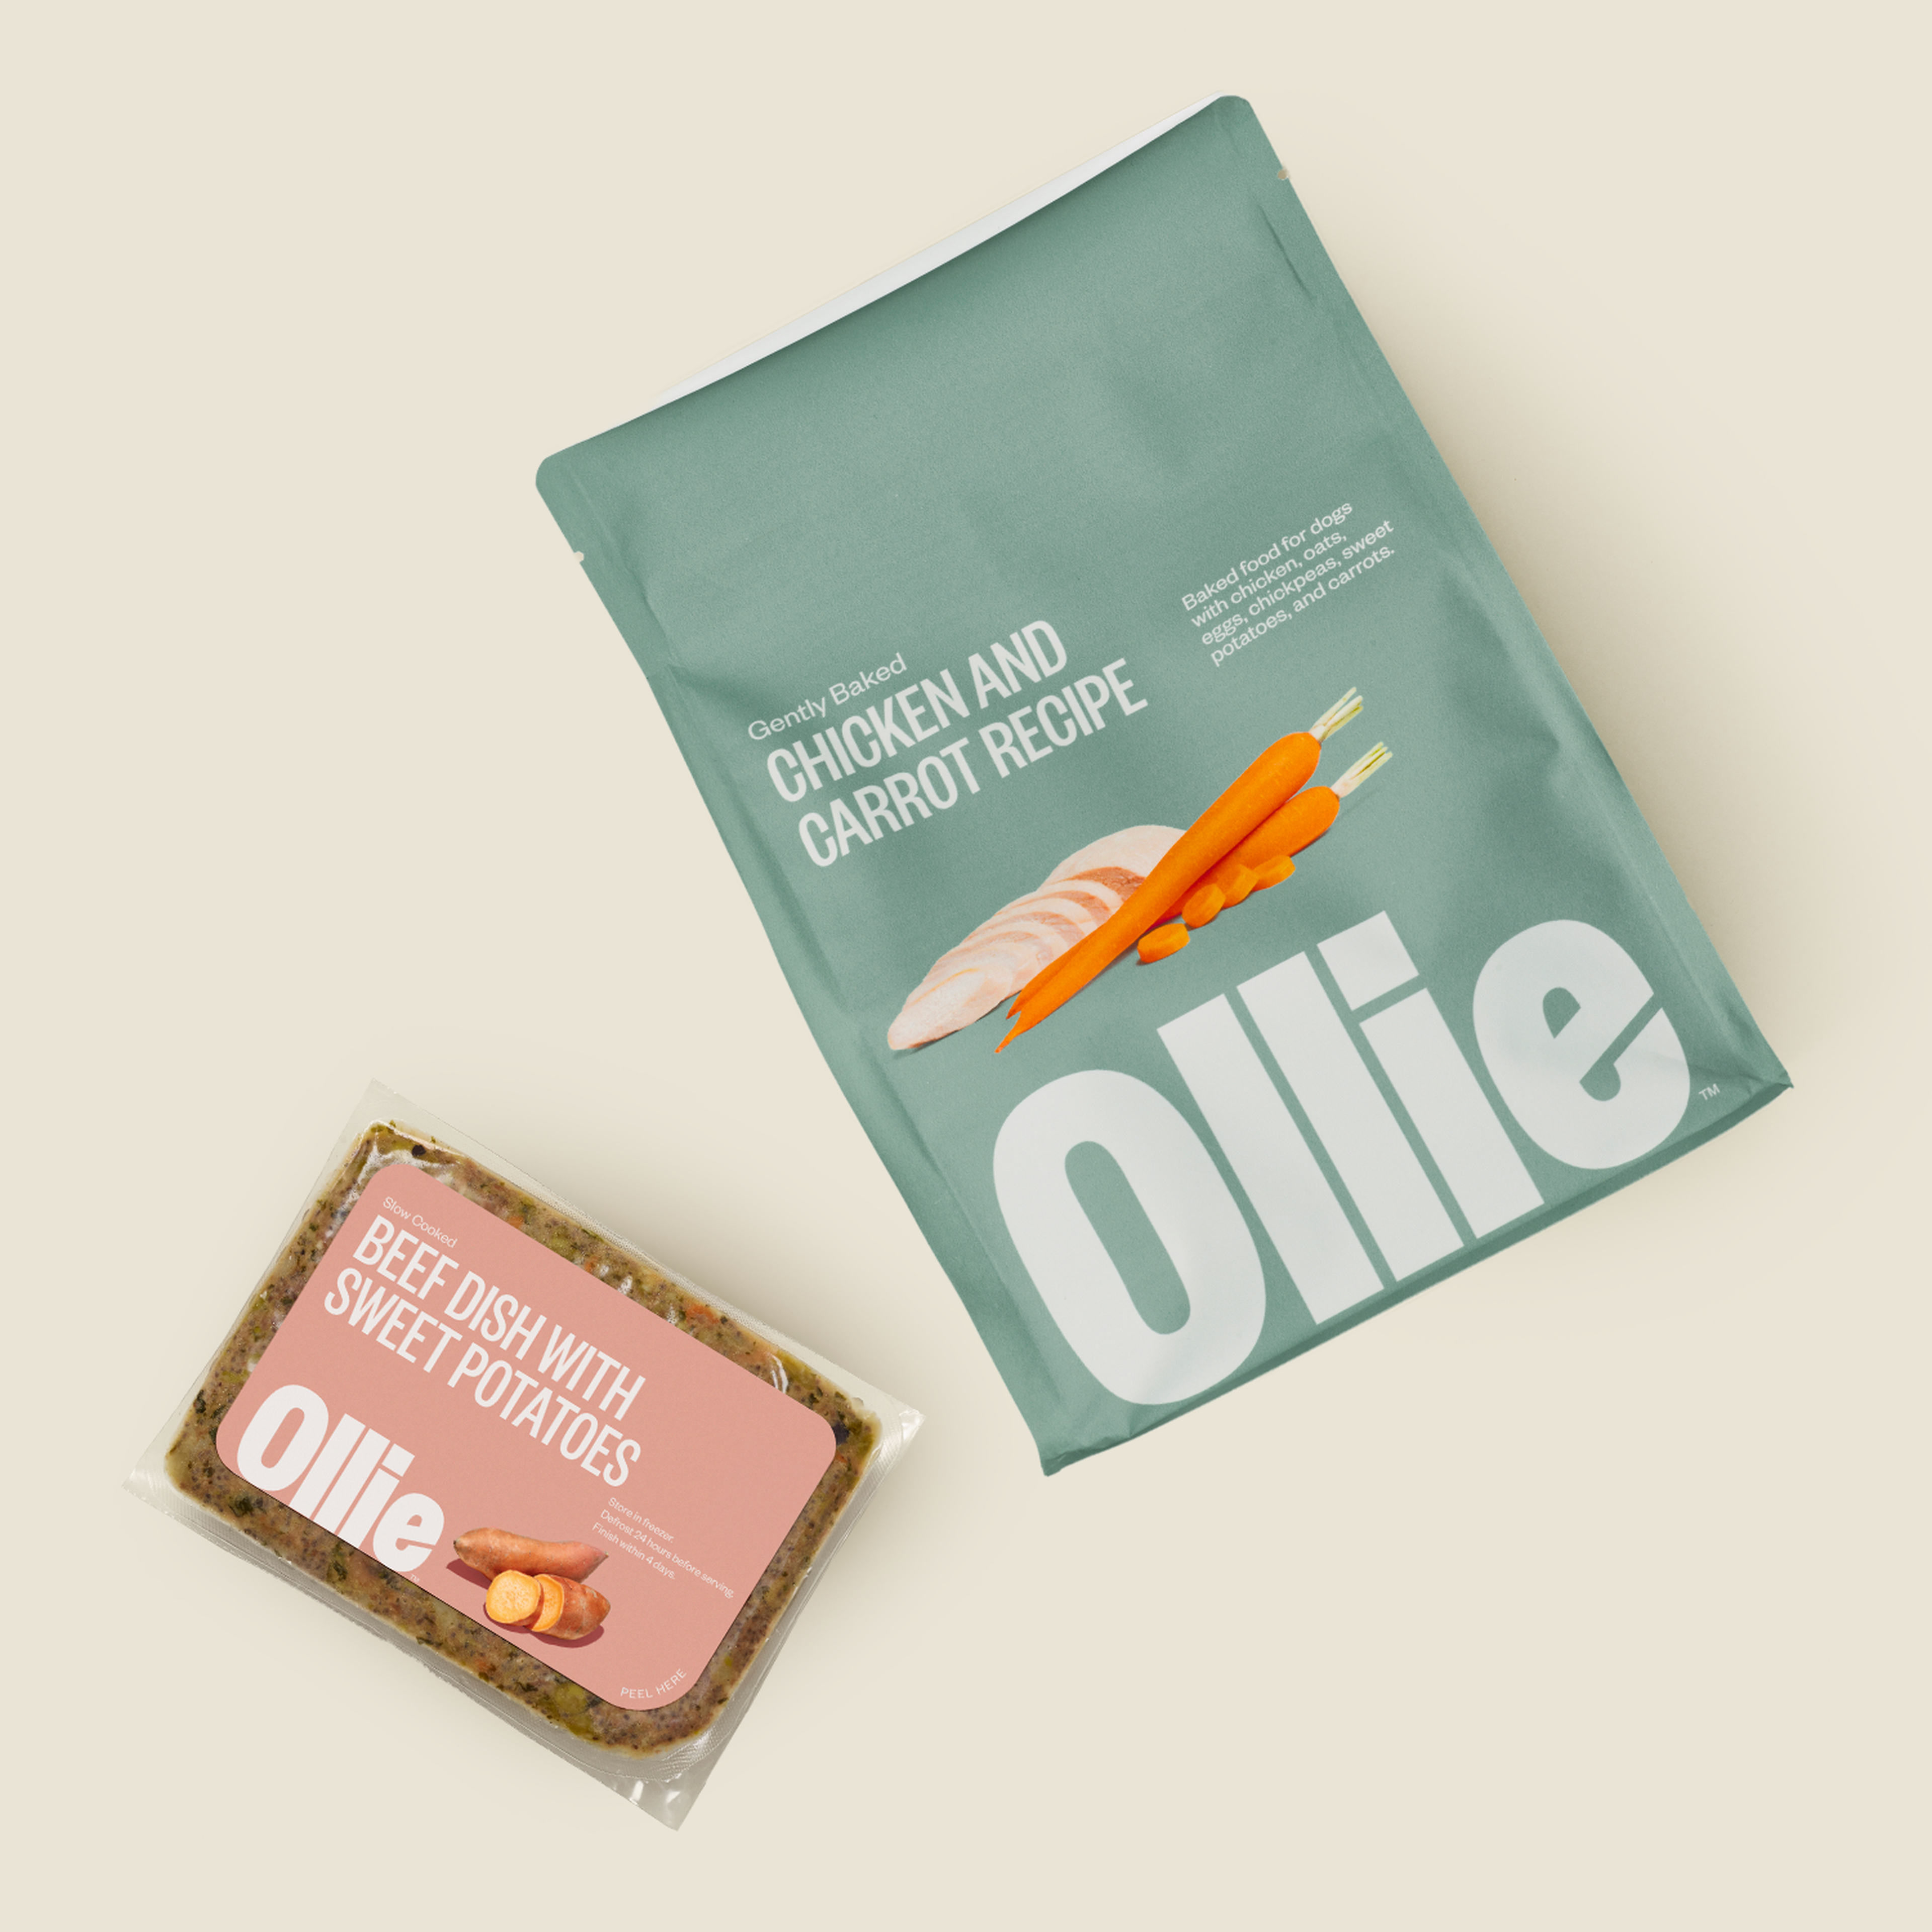 A pack of Ollie's Fresh recipe and a bag of Ollie's Baked recipe.